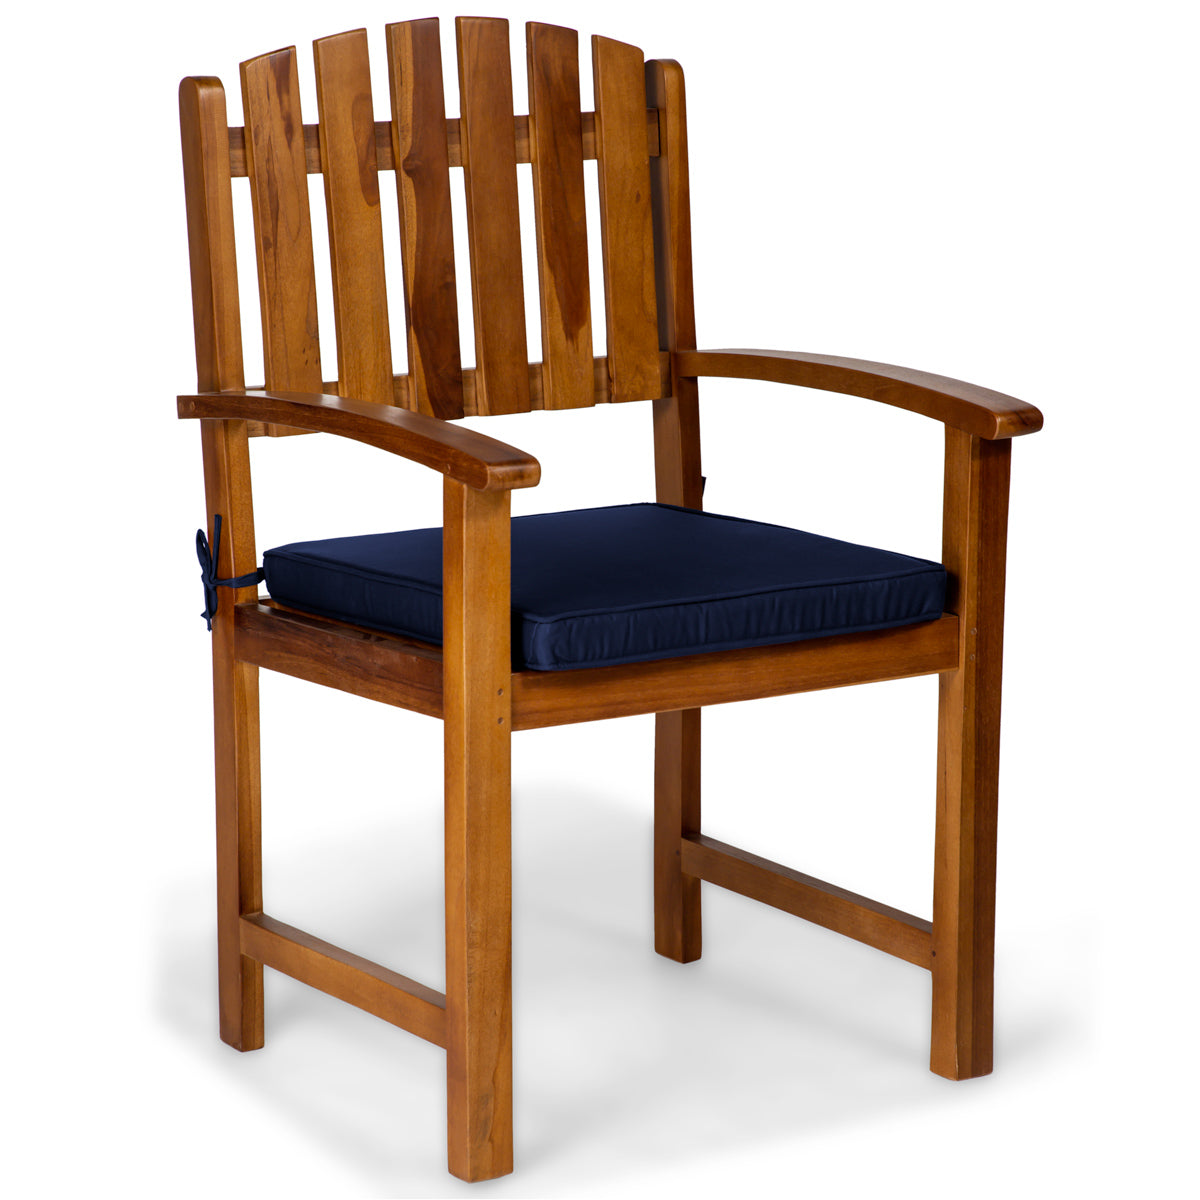 Teak Dining Chair with Blue Cover